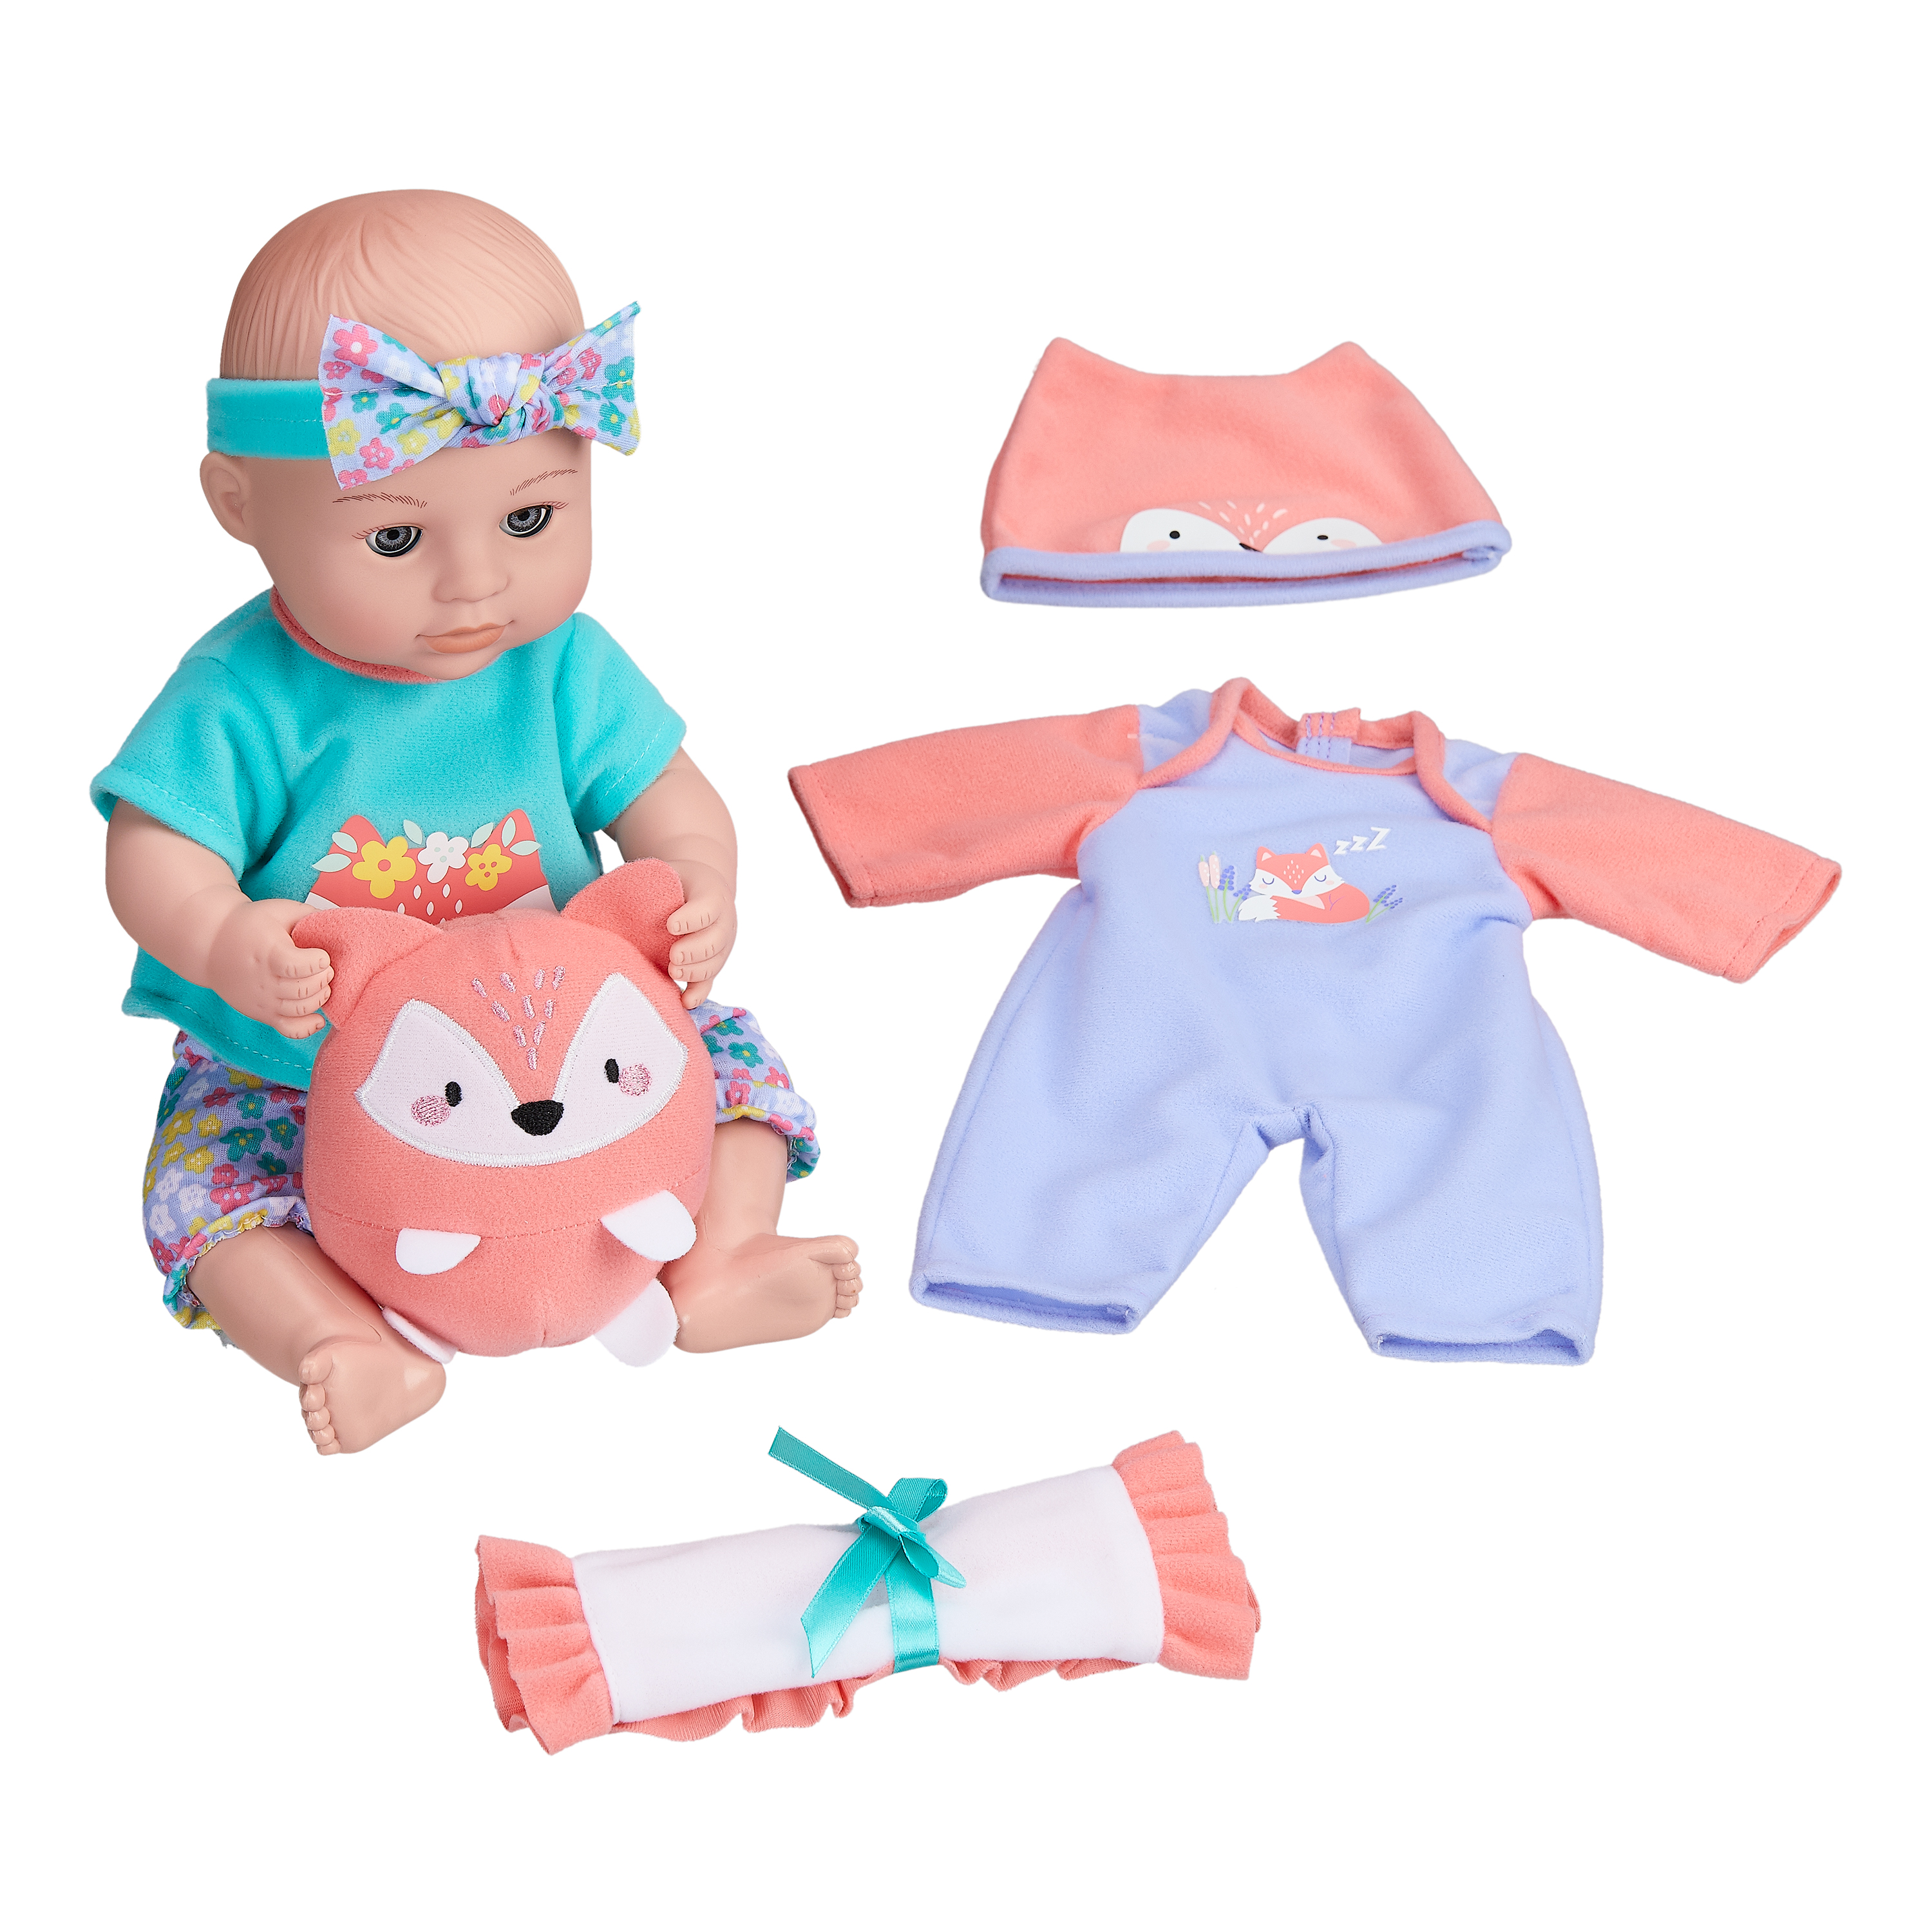 My Sweet Love Bedtime Baby Doll Playset, 8 Pieces Included - image 1 of 4